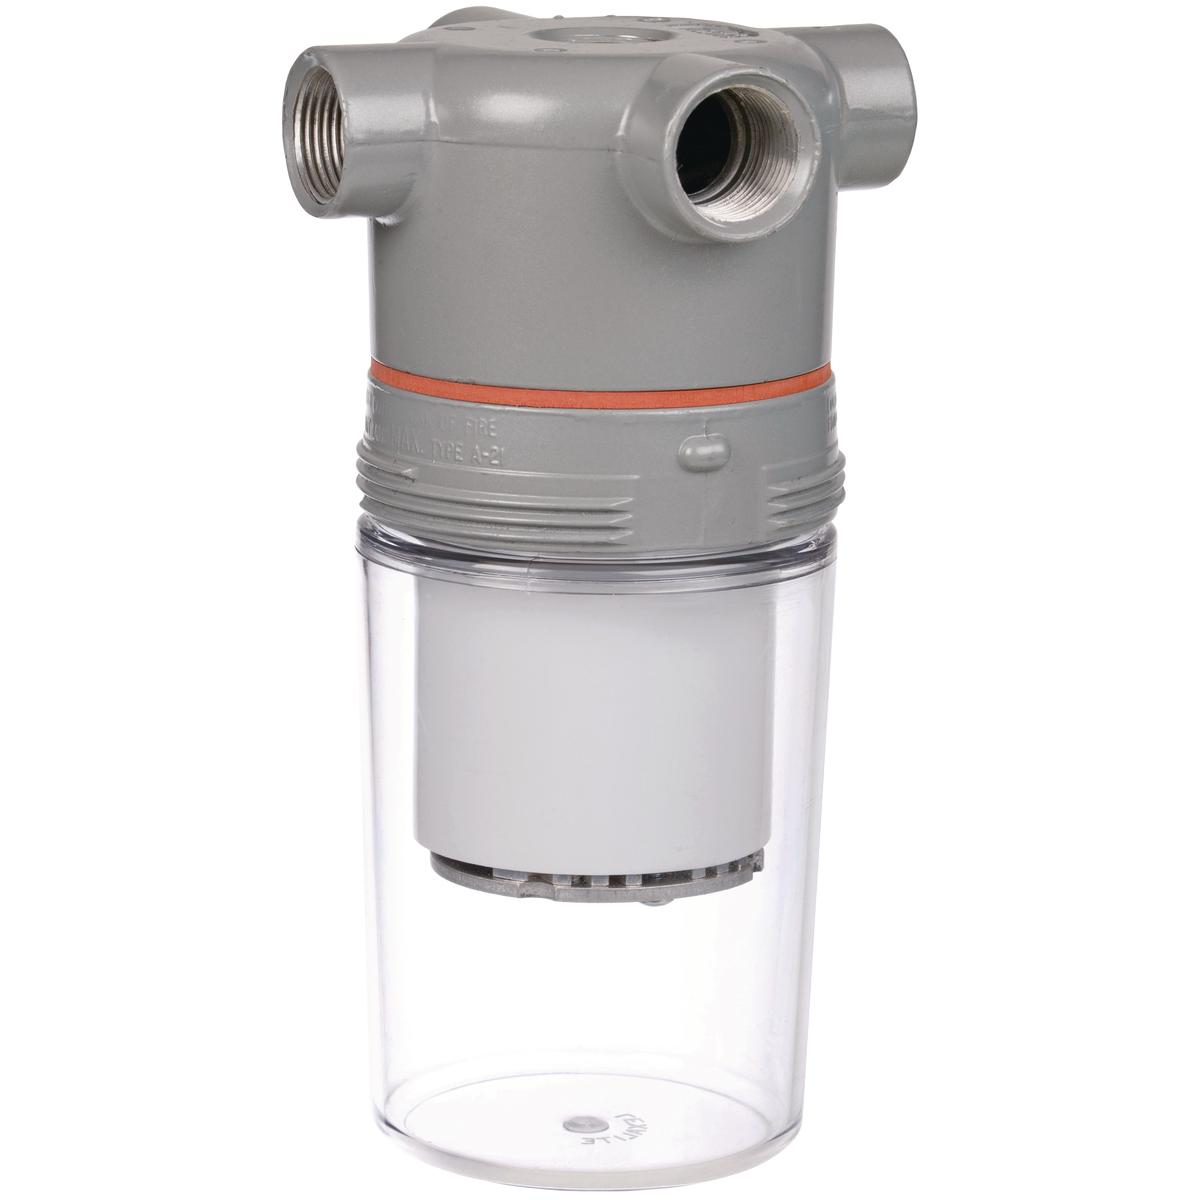 Hubbell VSL1330D1PN The VSL Series is a Vapor Tight/ Utility fixture using energy efficient LED's. This fixture is made with a cast copper-free aluminum housing and mount that is  suitable for harsh and hazardous environments. With the design of this fixtures internal heat s